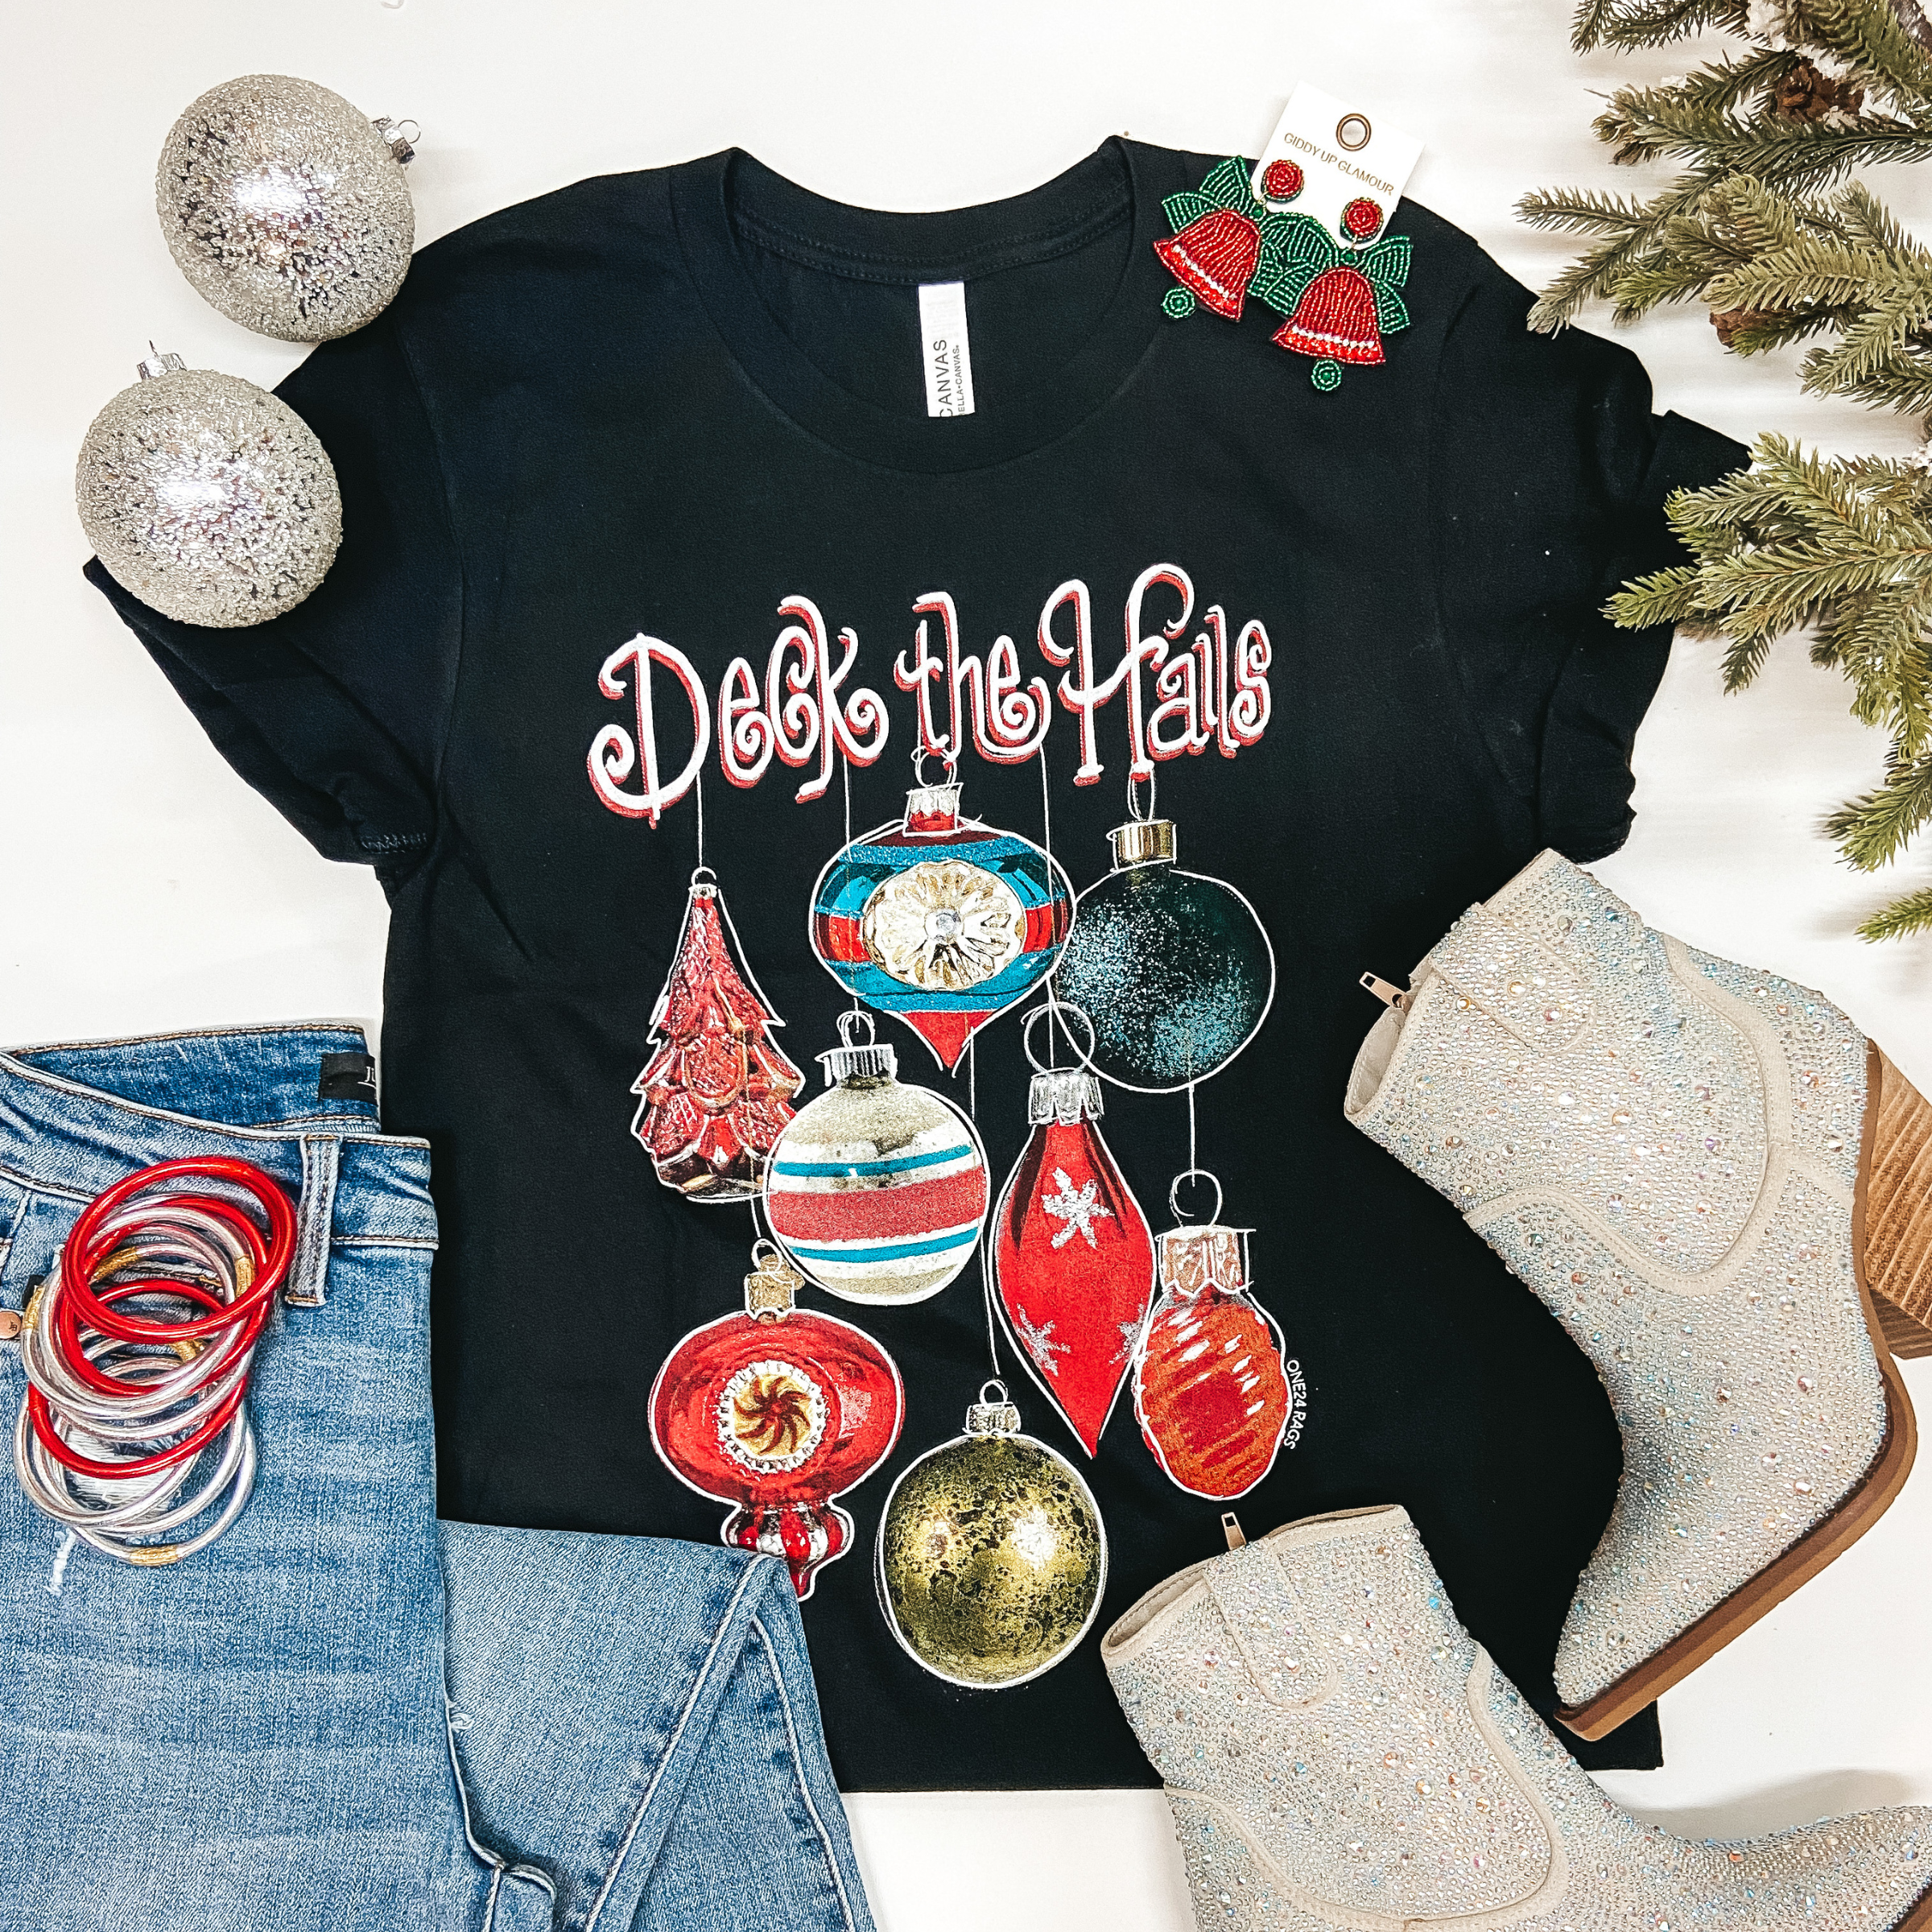 A solid black graphic tee with ornaments on the front and the phrase "Deck the Halls" written across the front. Pictured on a white background with silver booties, red earrings, silver and red bangles, and light wash jeans.